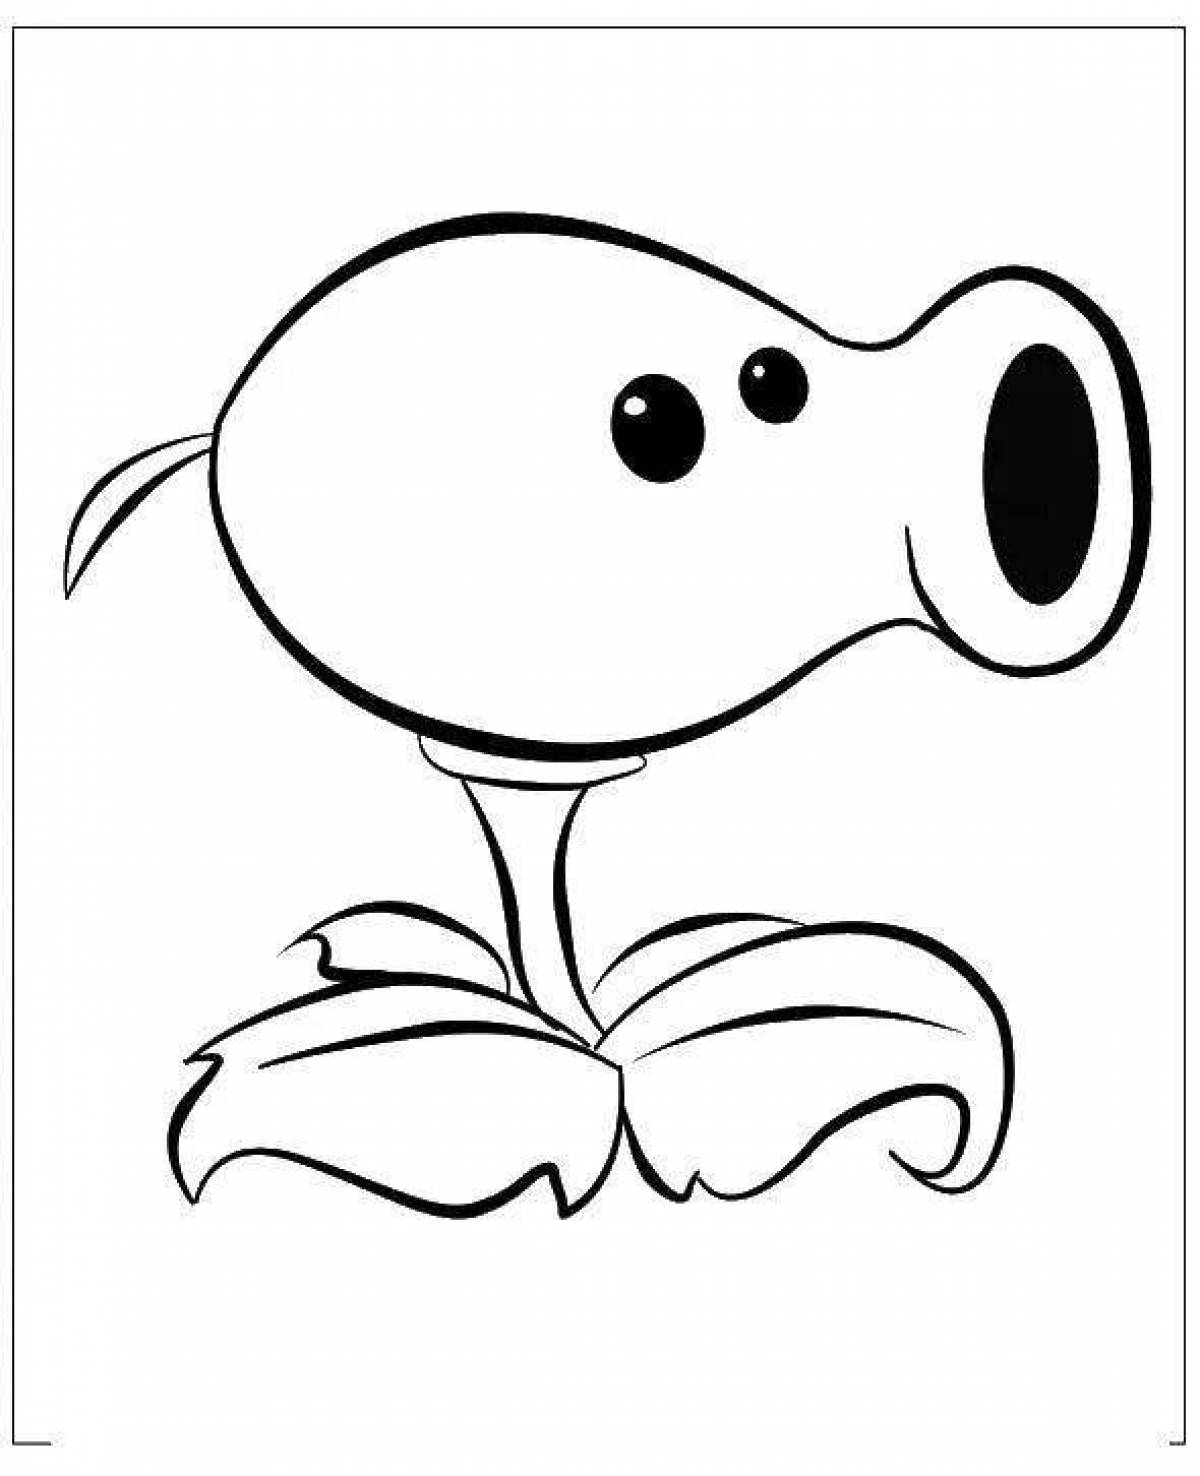 Coloring page playful pea shooter